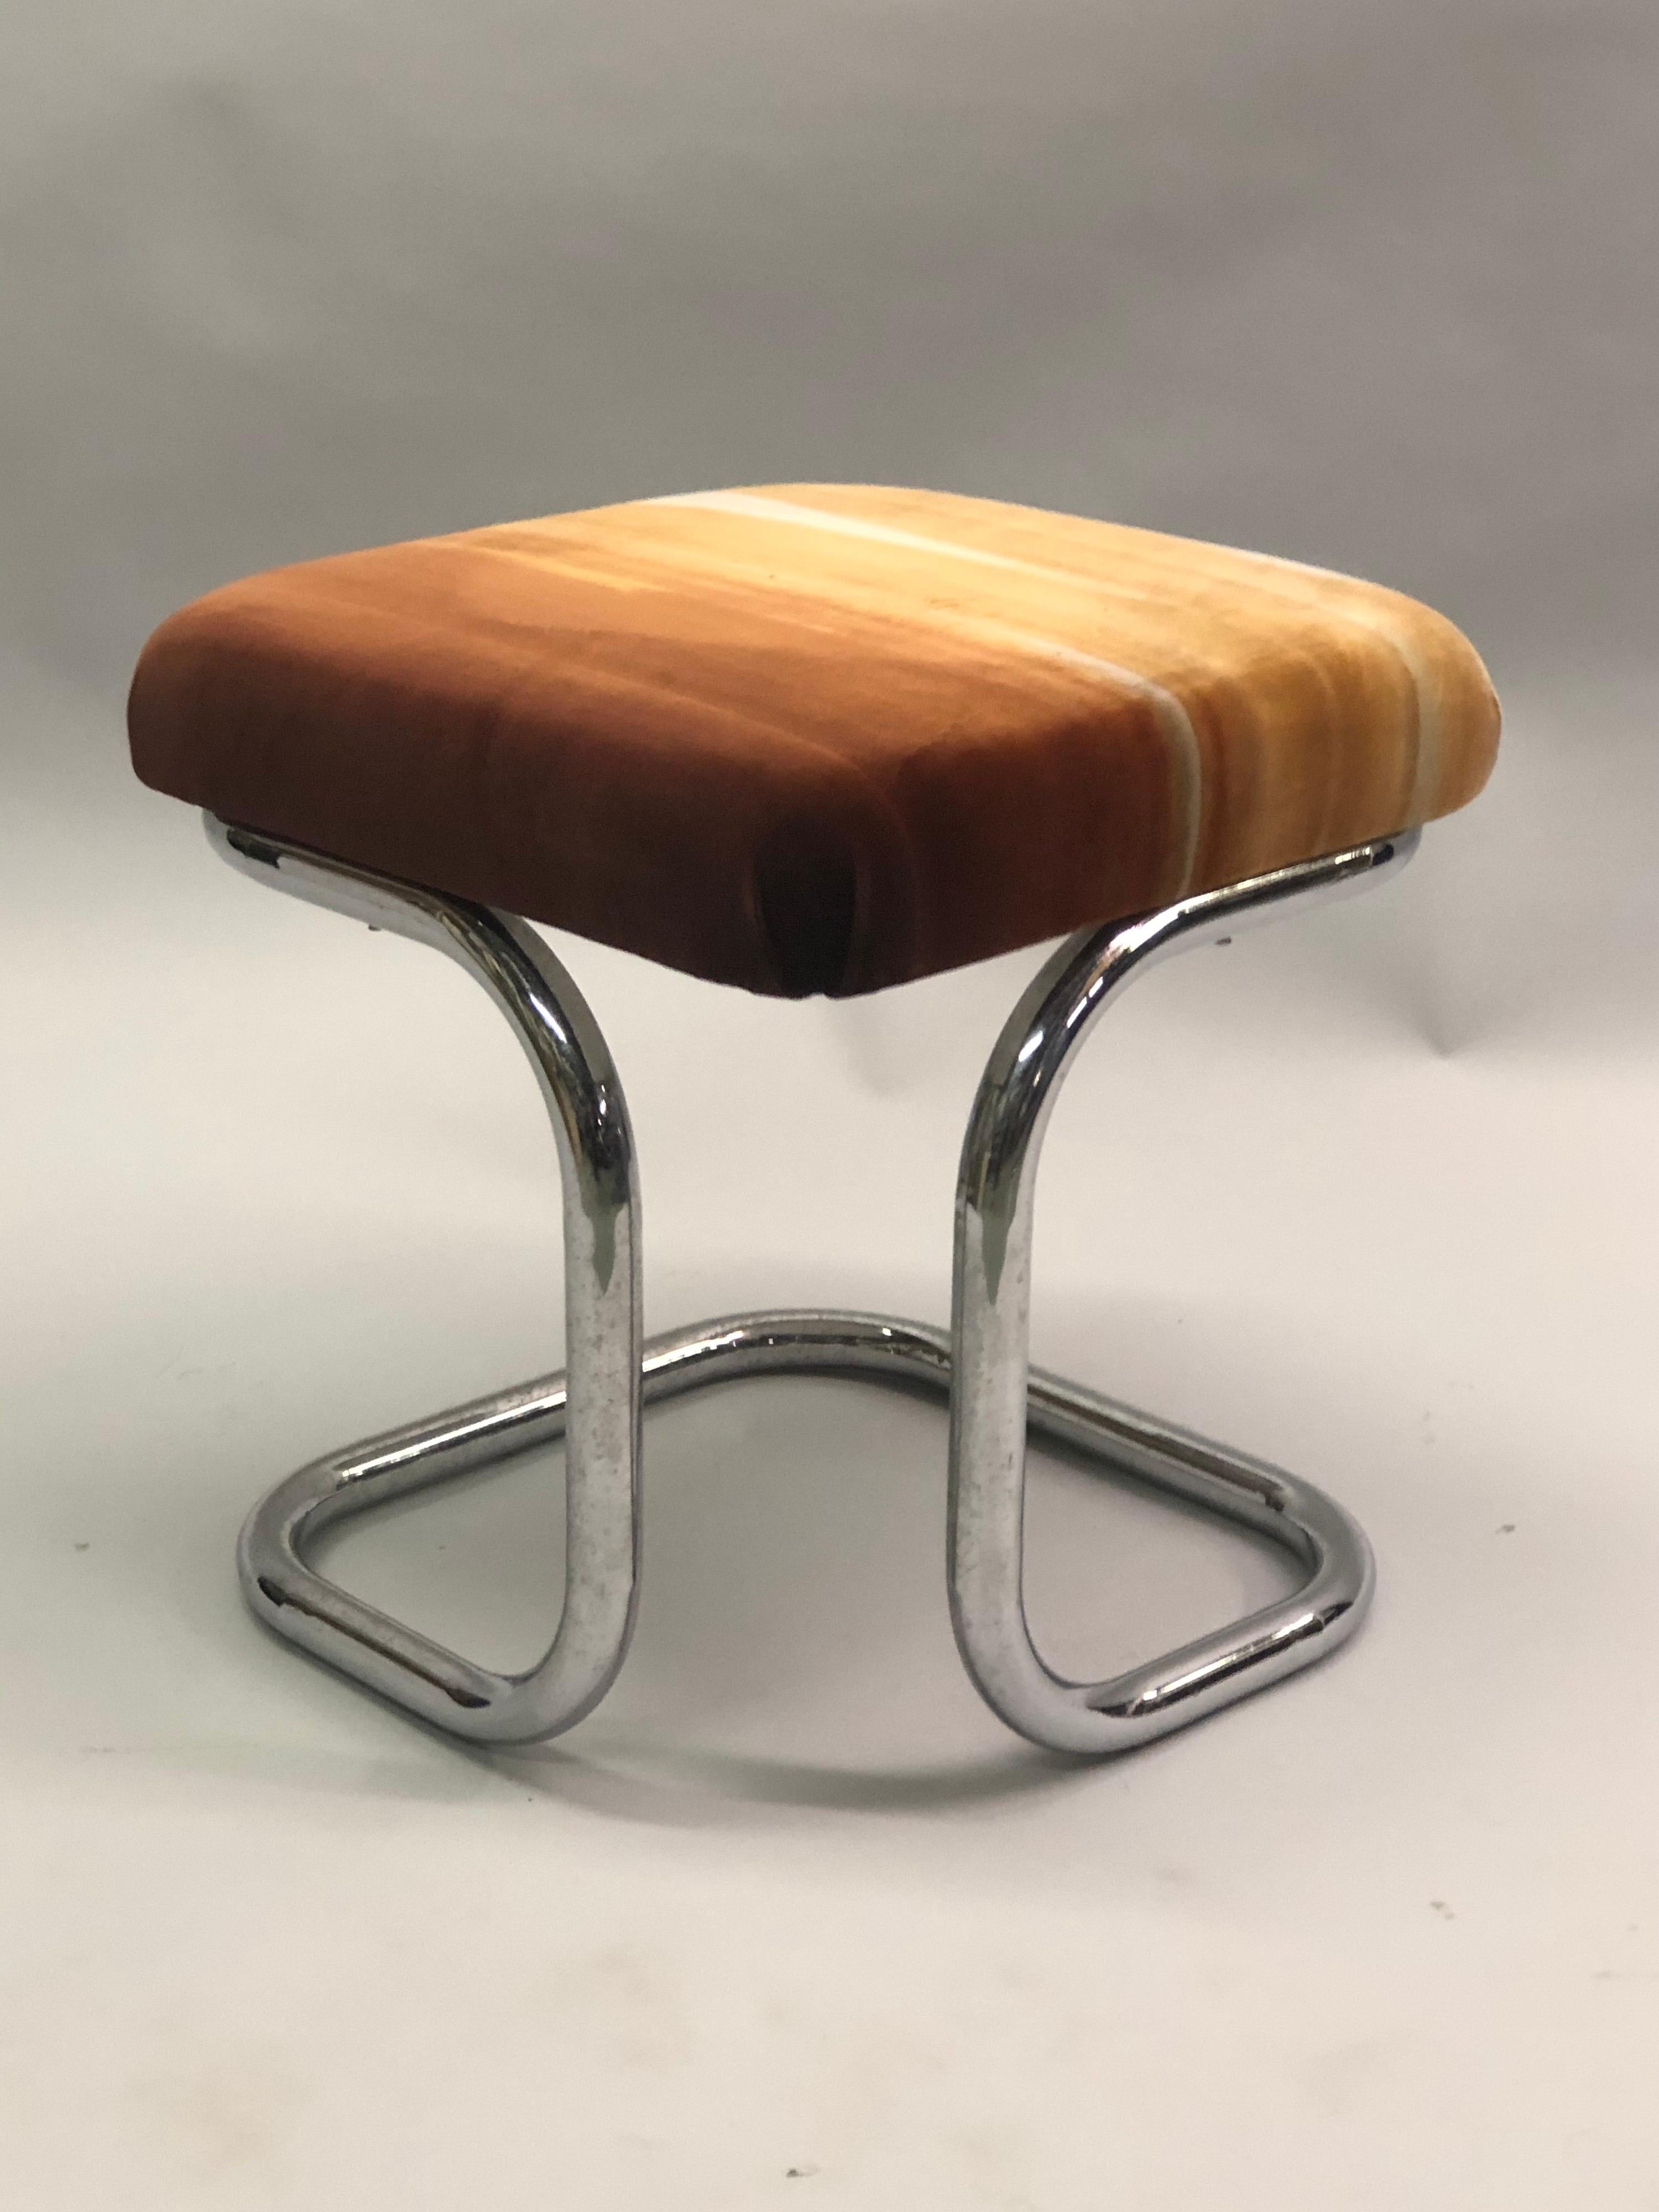 Pair of French Modernist ‘Bauhaus’ Stools with Upholstered Seats by Hermès For Sale 4